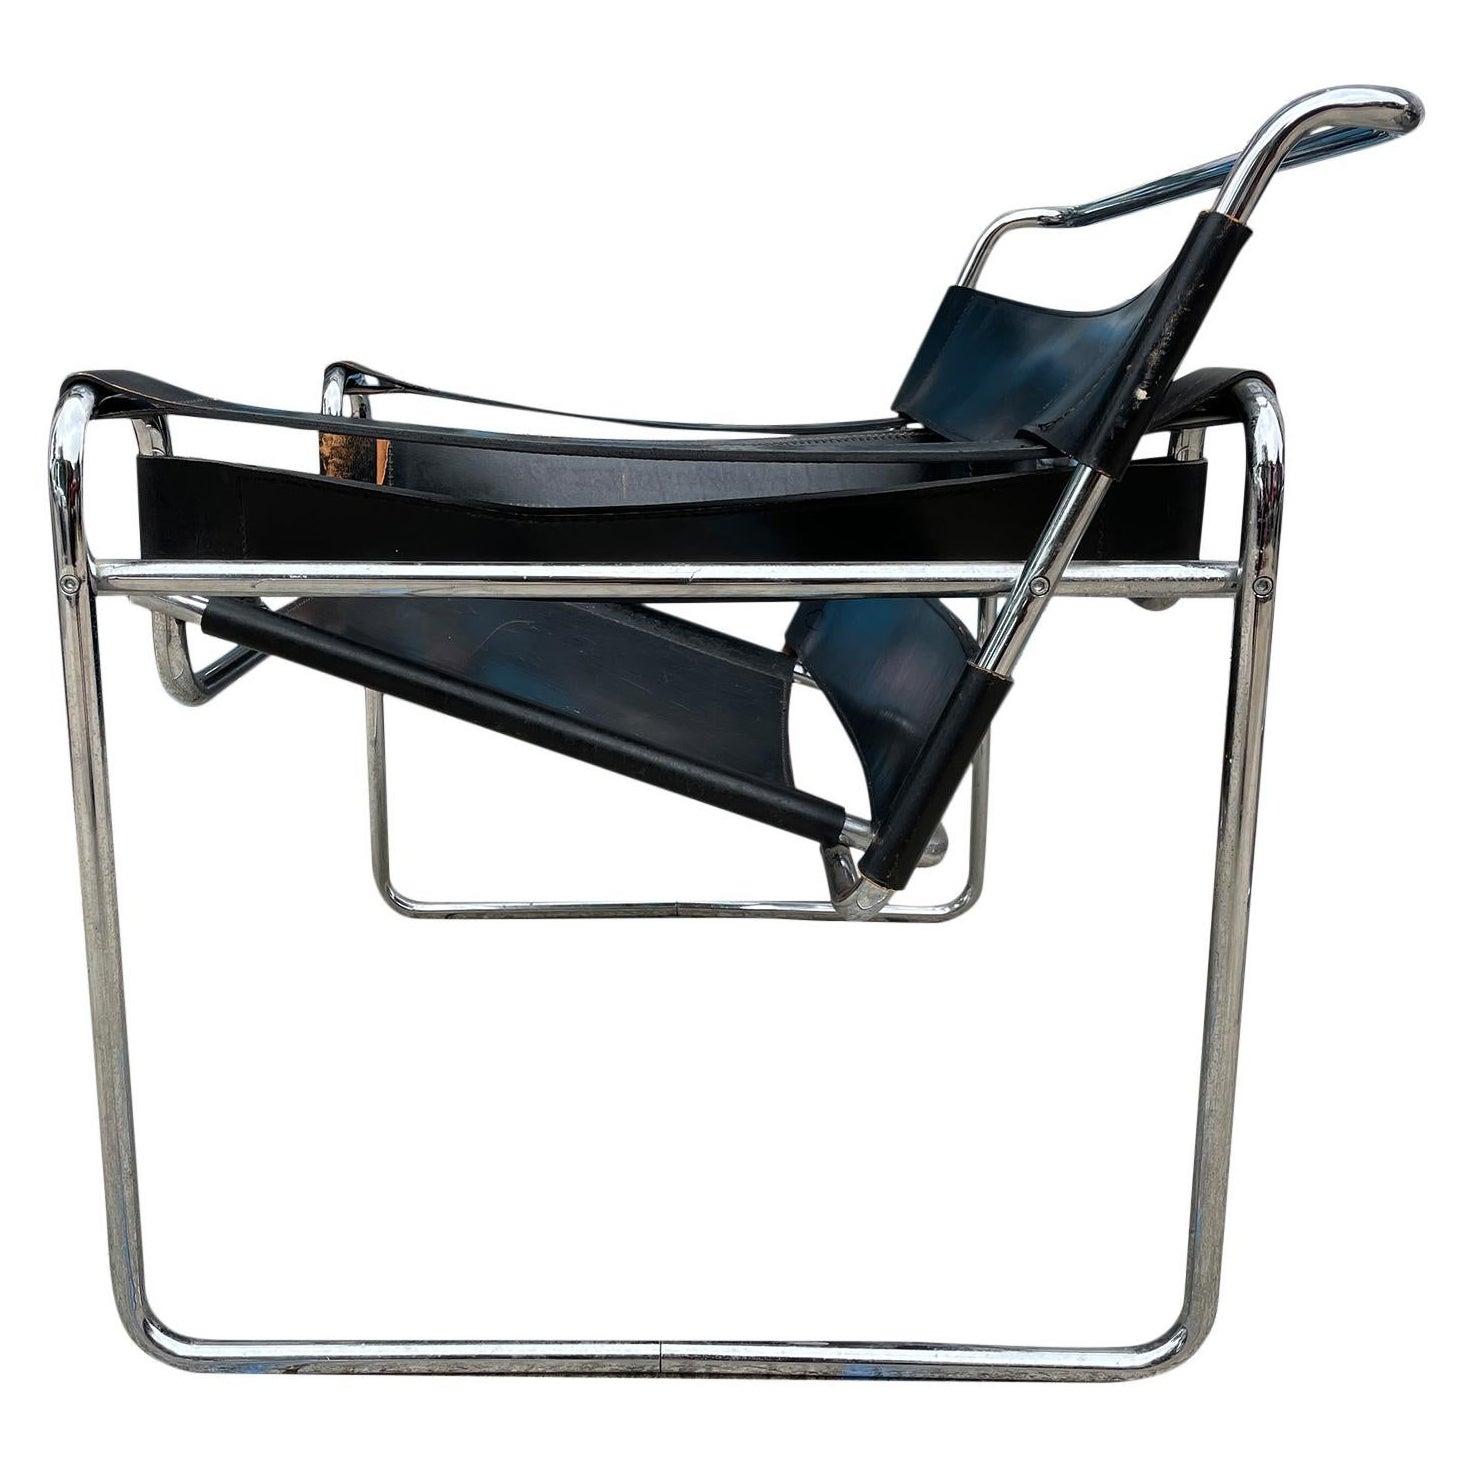 Are Wassily chairs mid-century modern?